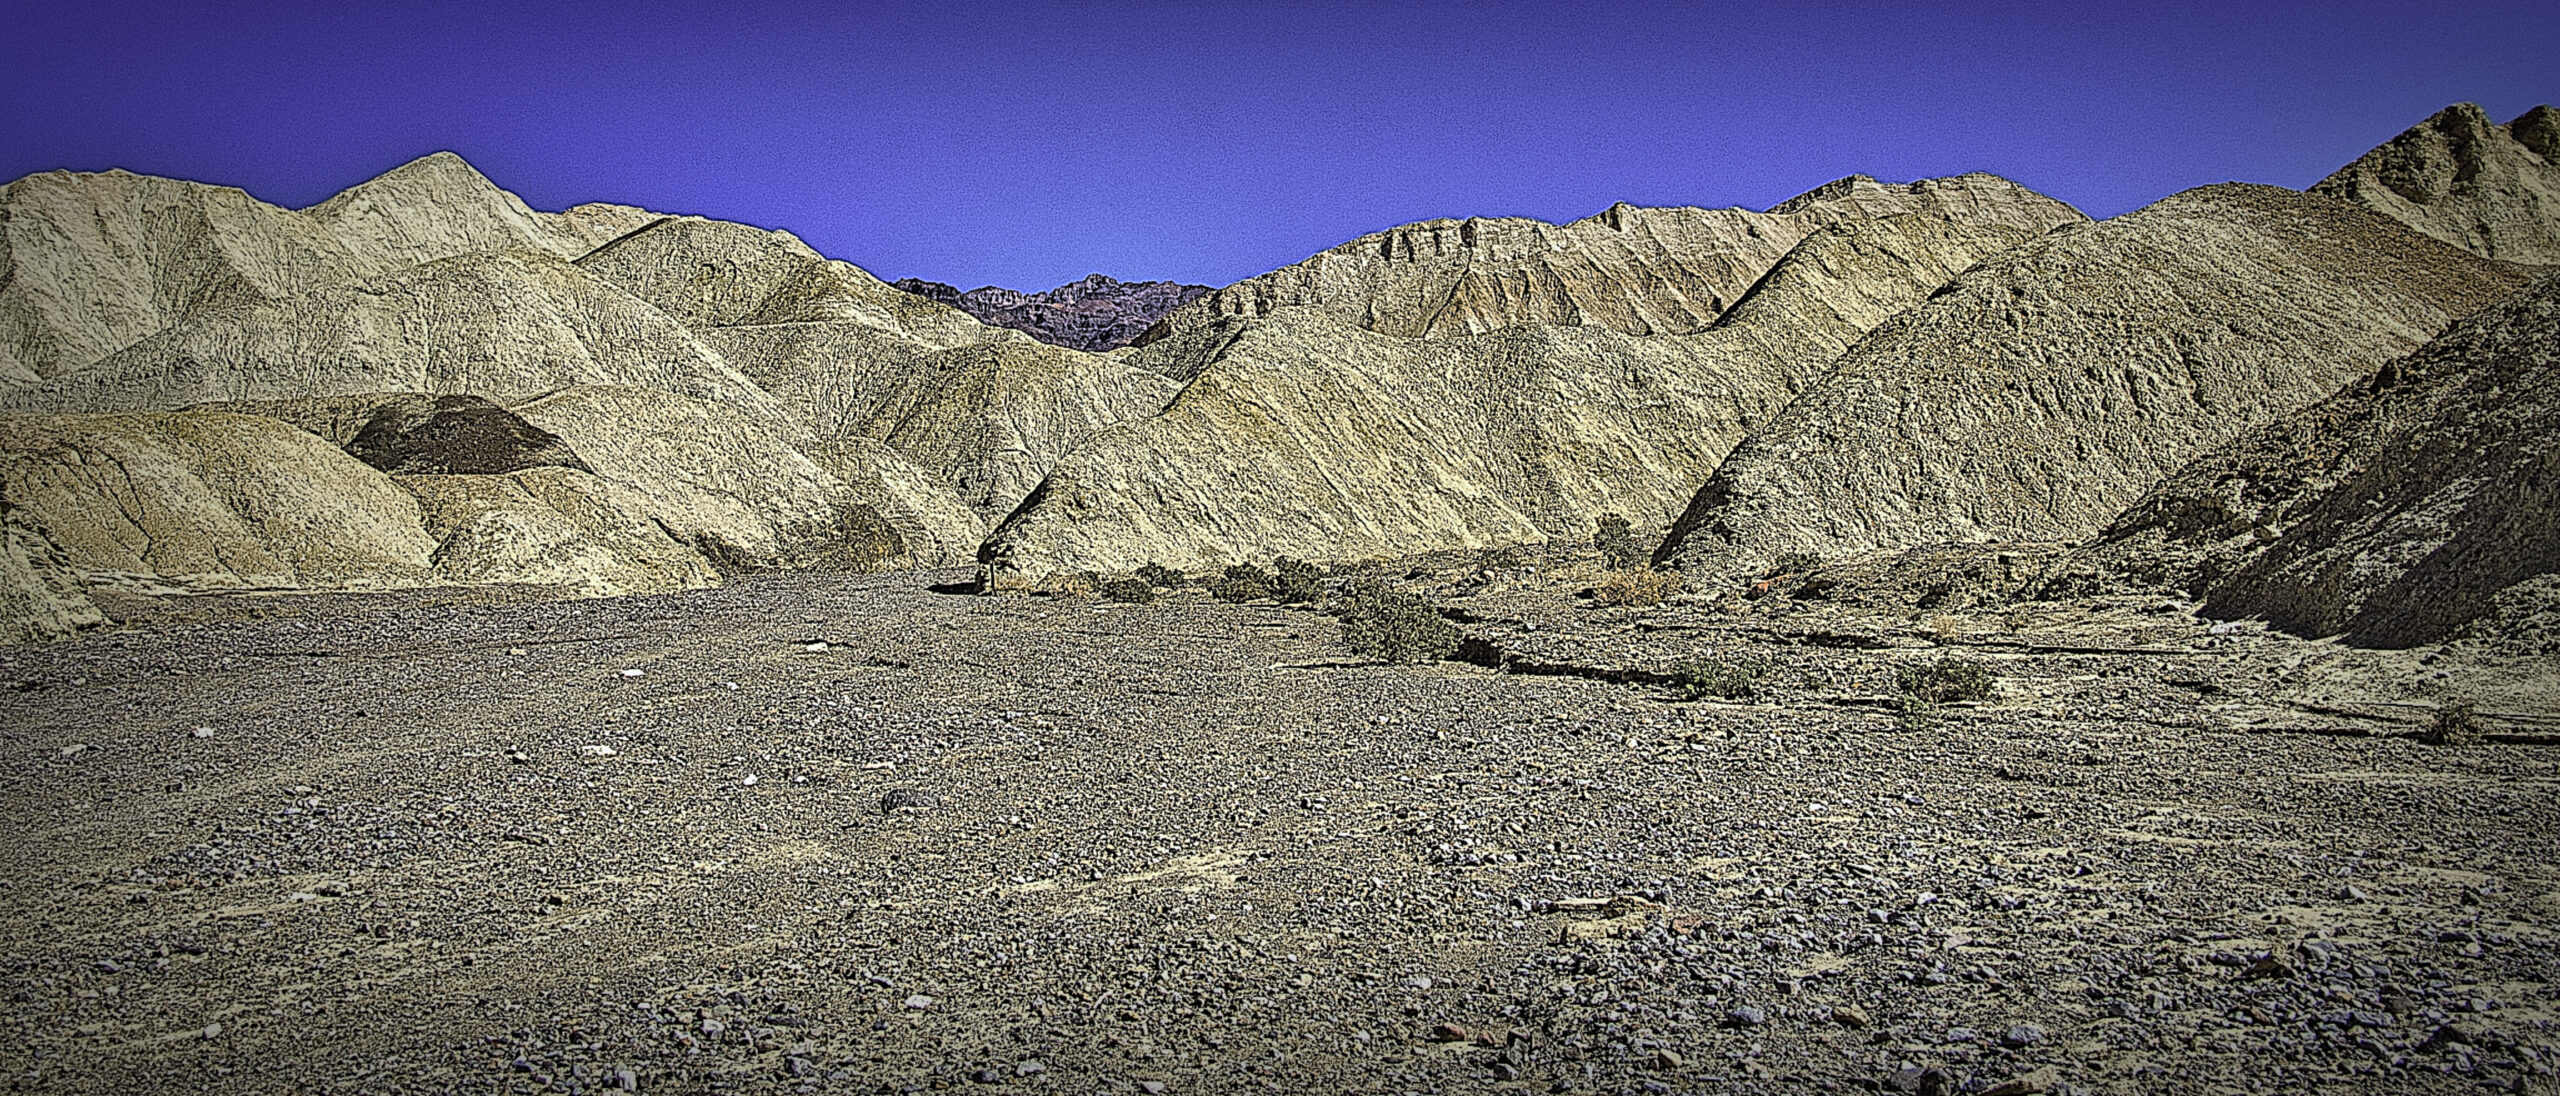 Hills of Borax in Death Valley